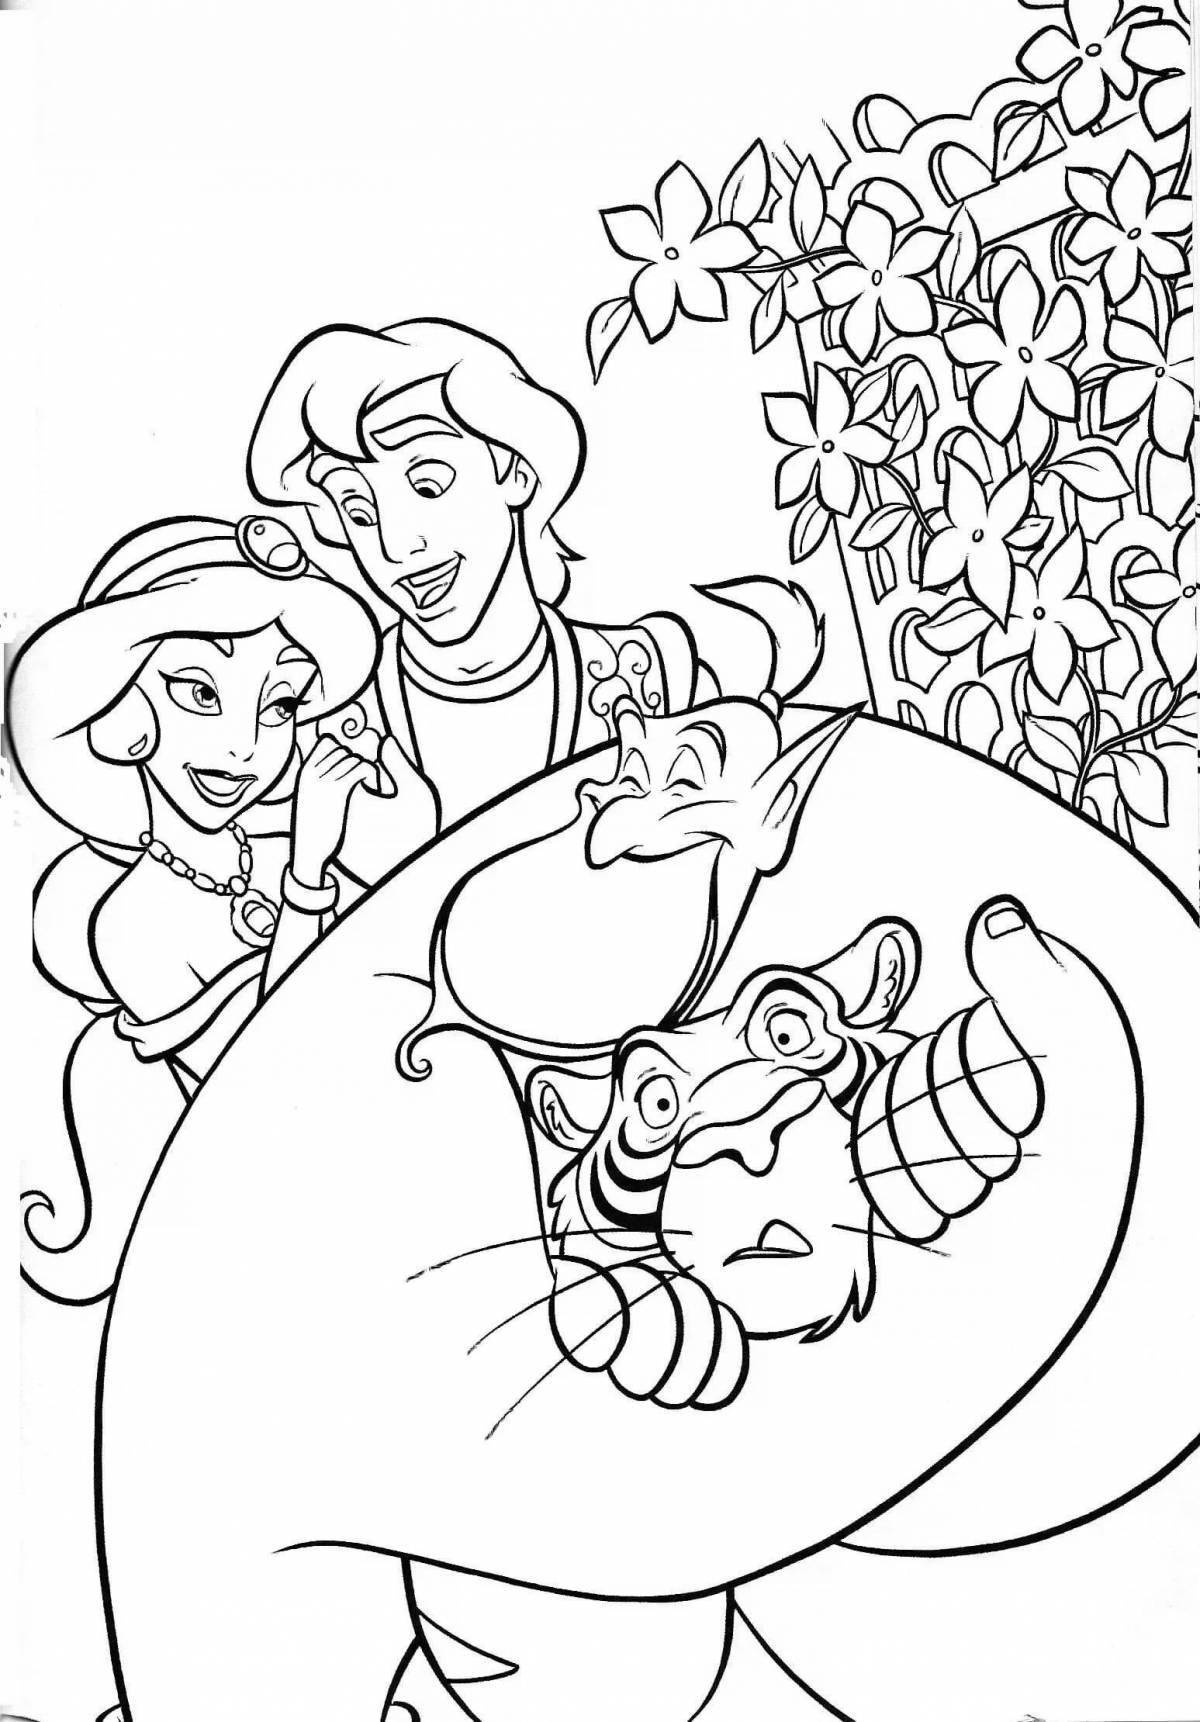 Outstanding Aladdin Coloring Page